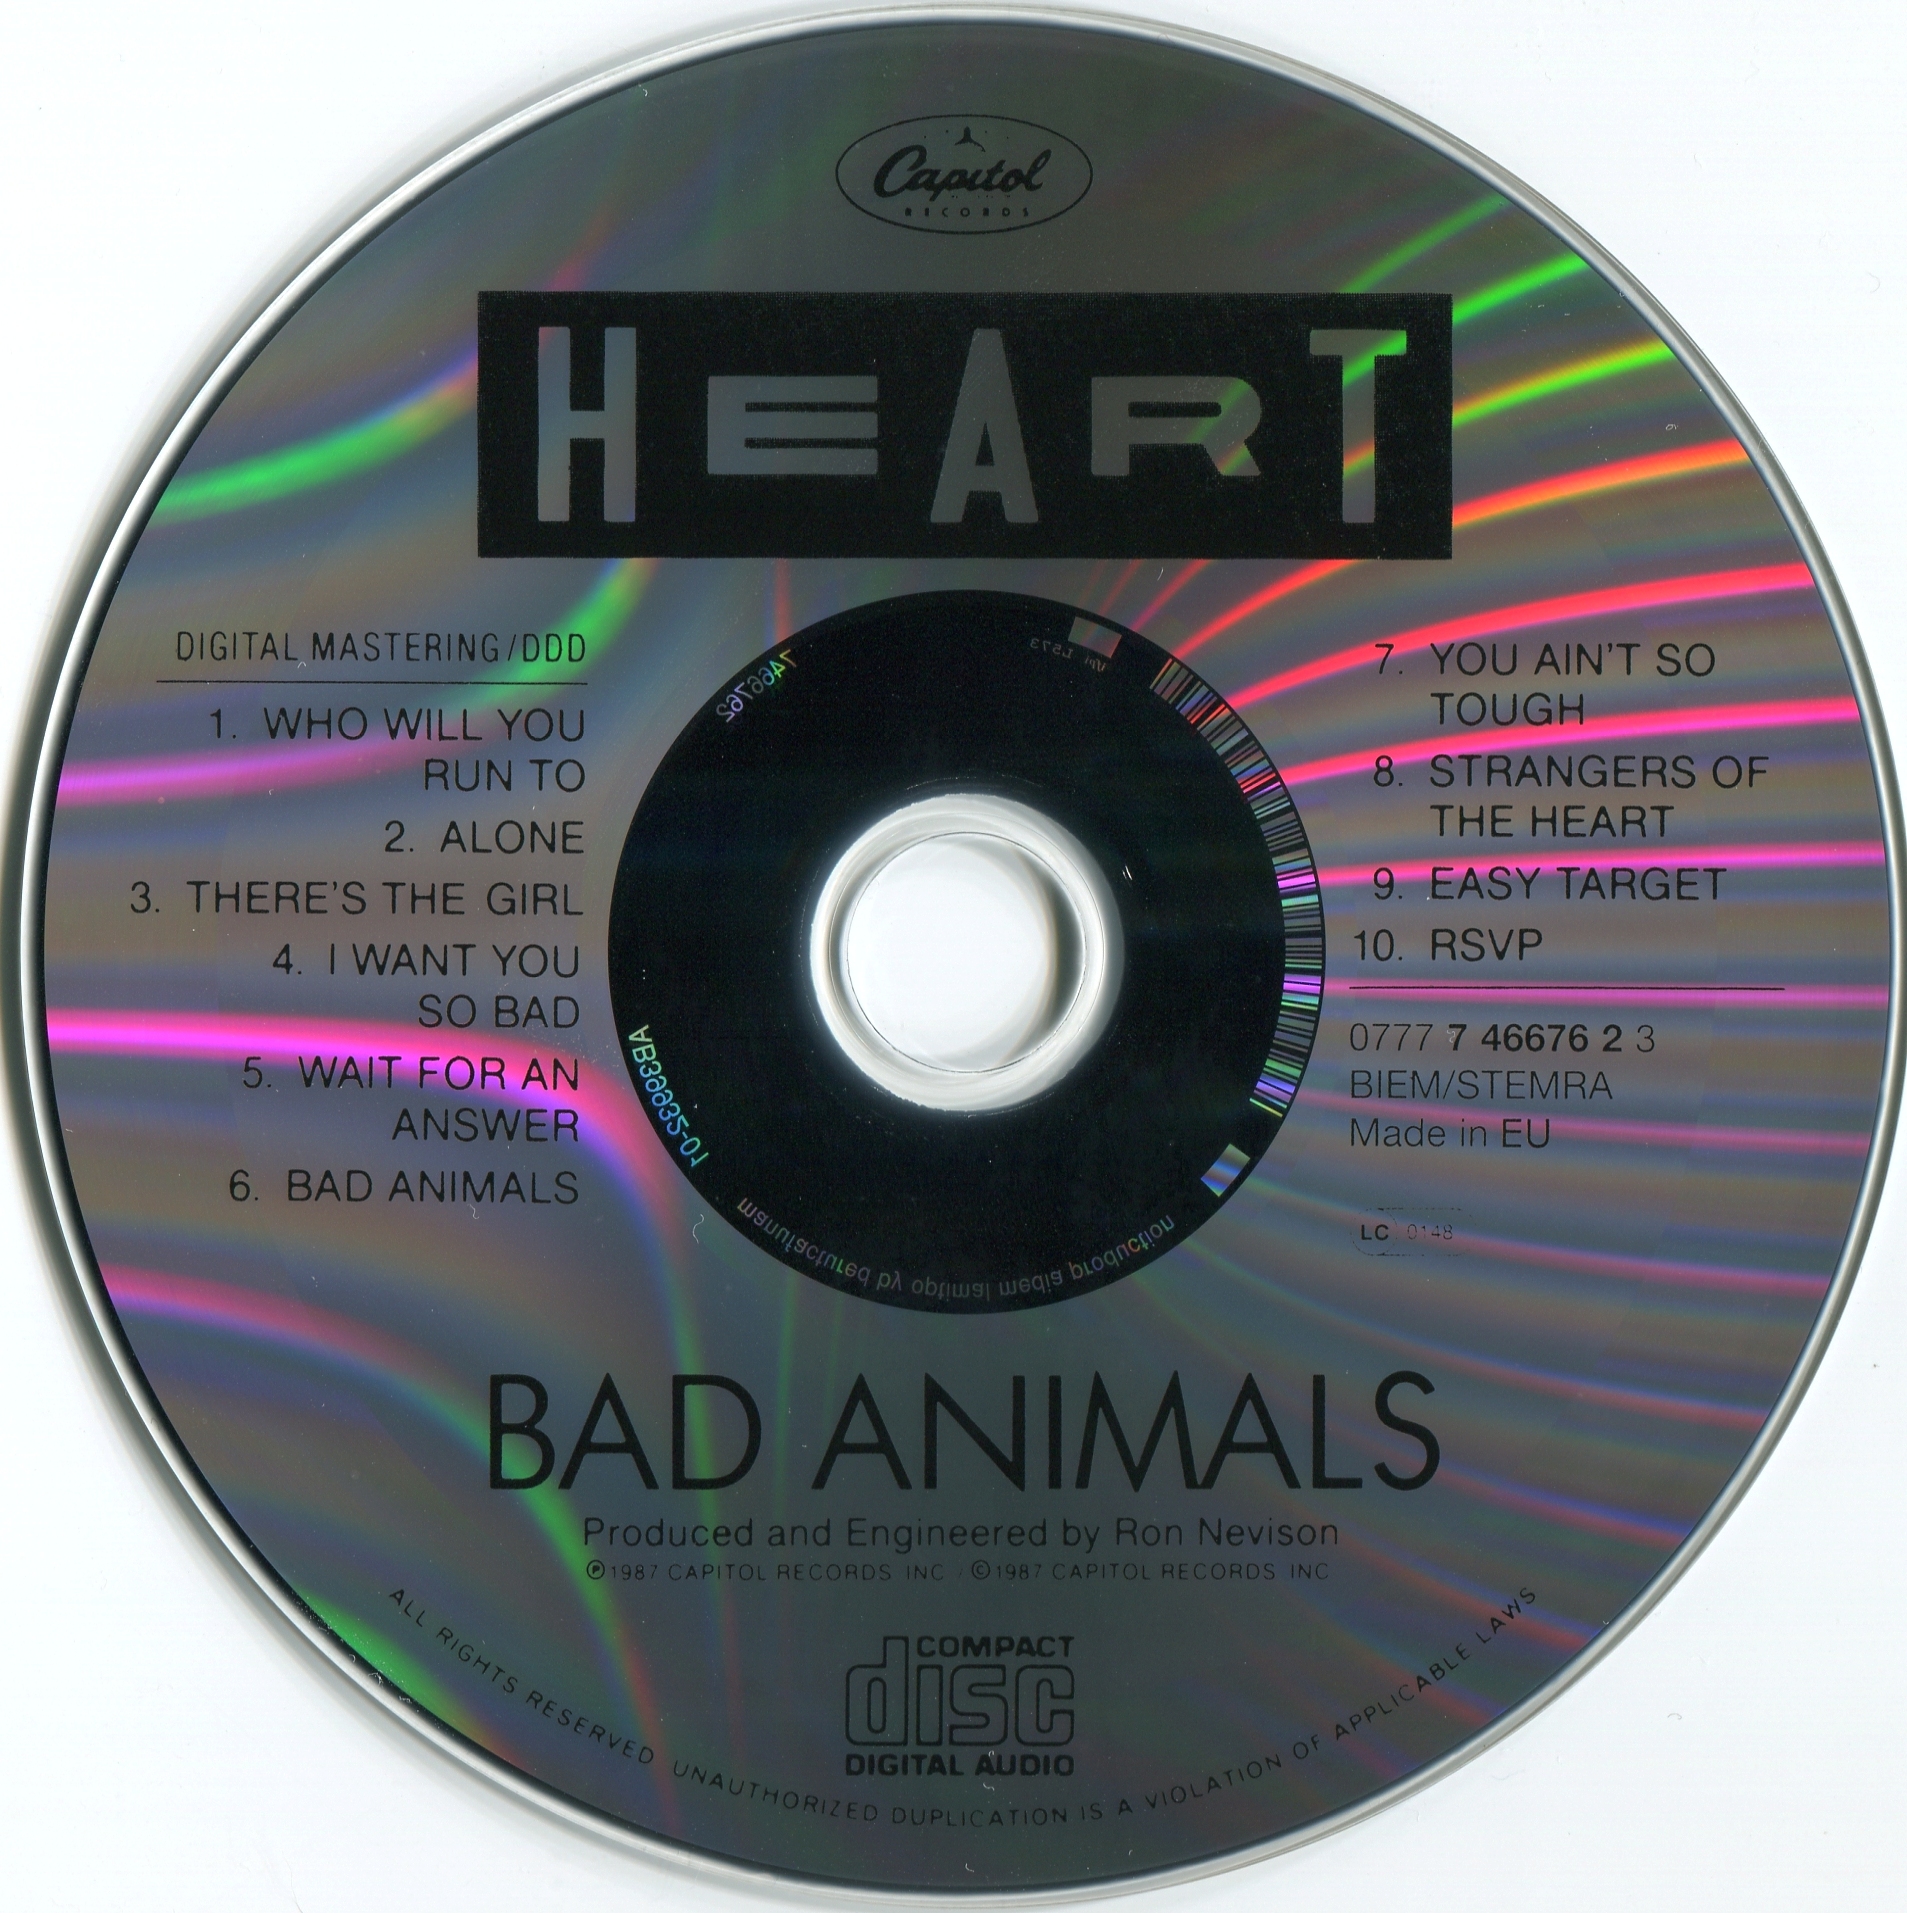 Heart Bad Animals cd | CD Covers | Cover Century | Over  Album Art  covers for free